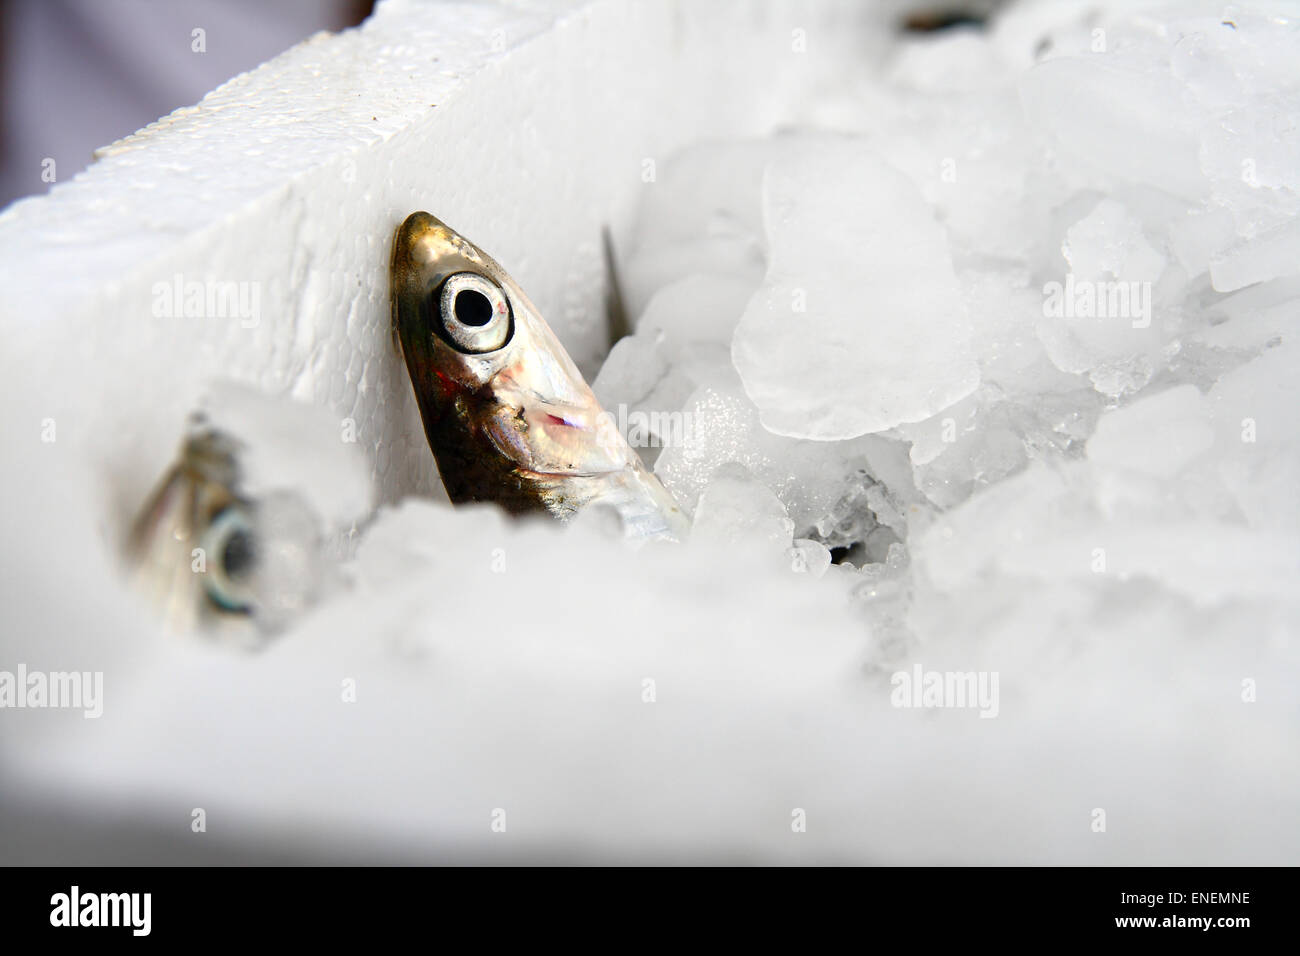 Fresh anchovy inside a pile of ice Stock Photo